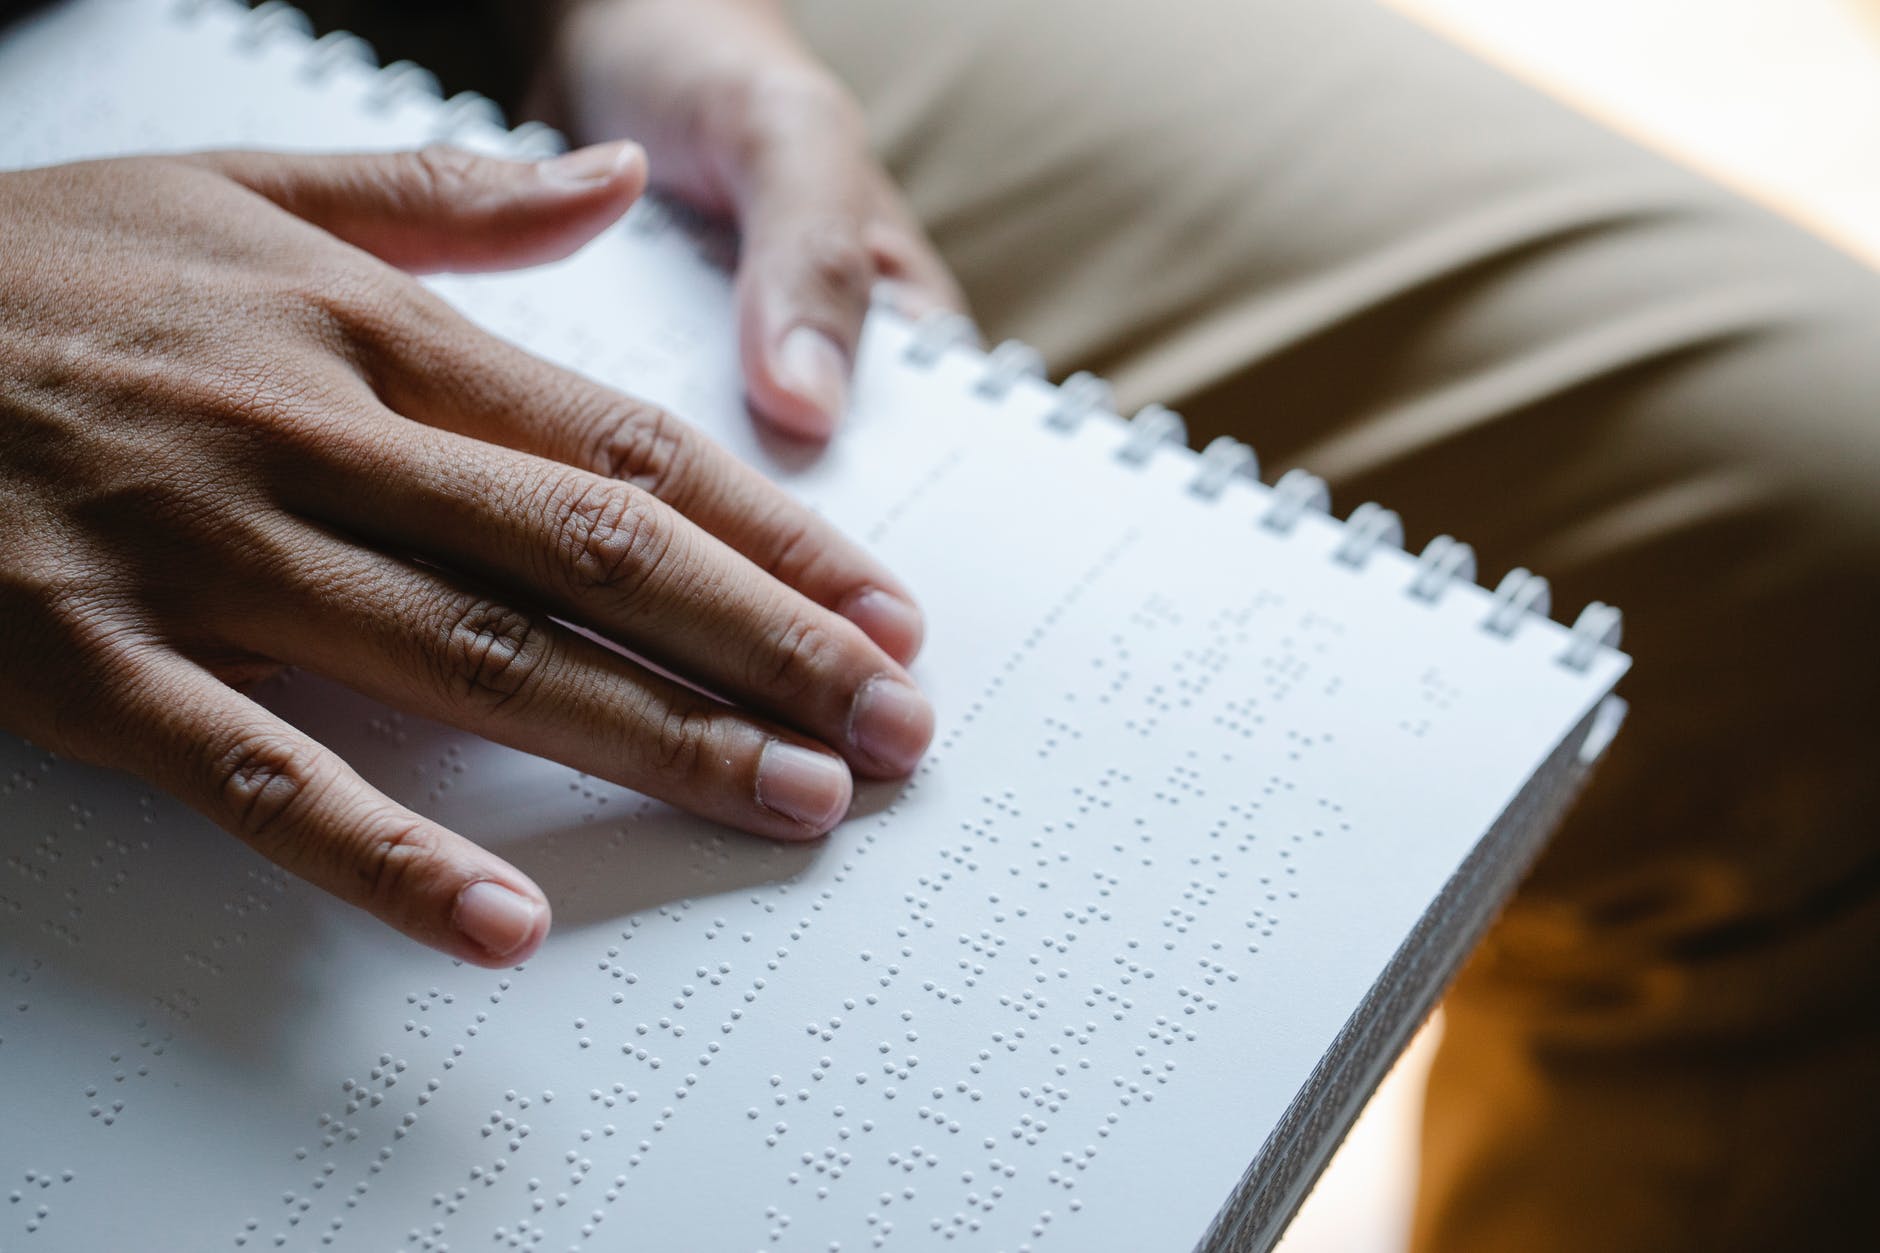 disabled person reading book with braille text